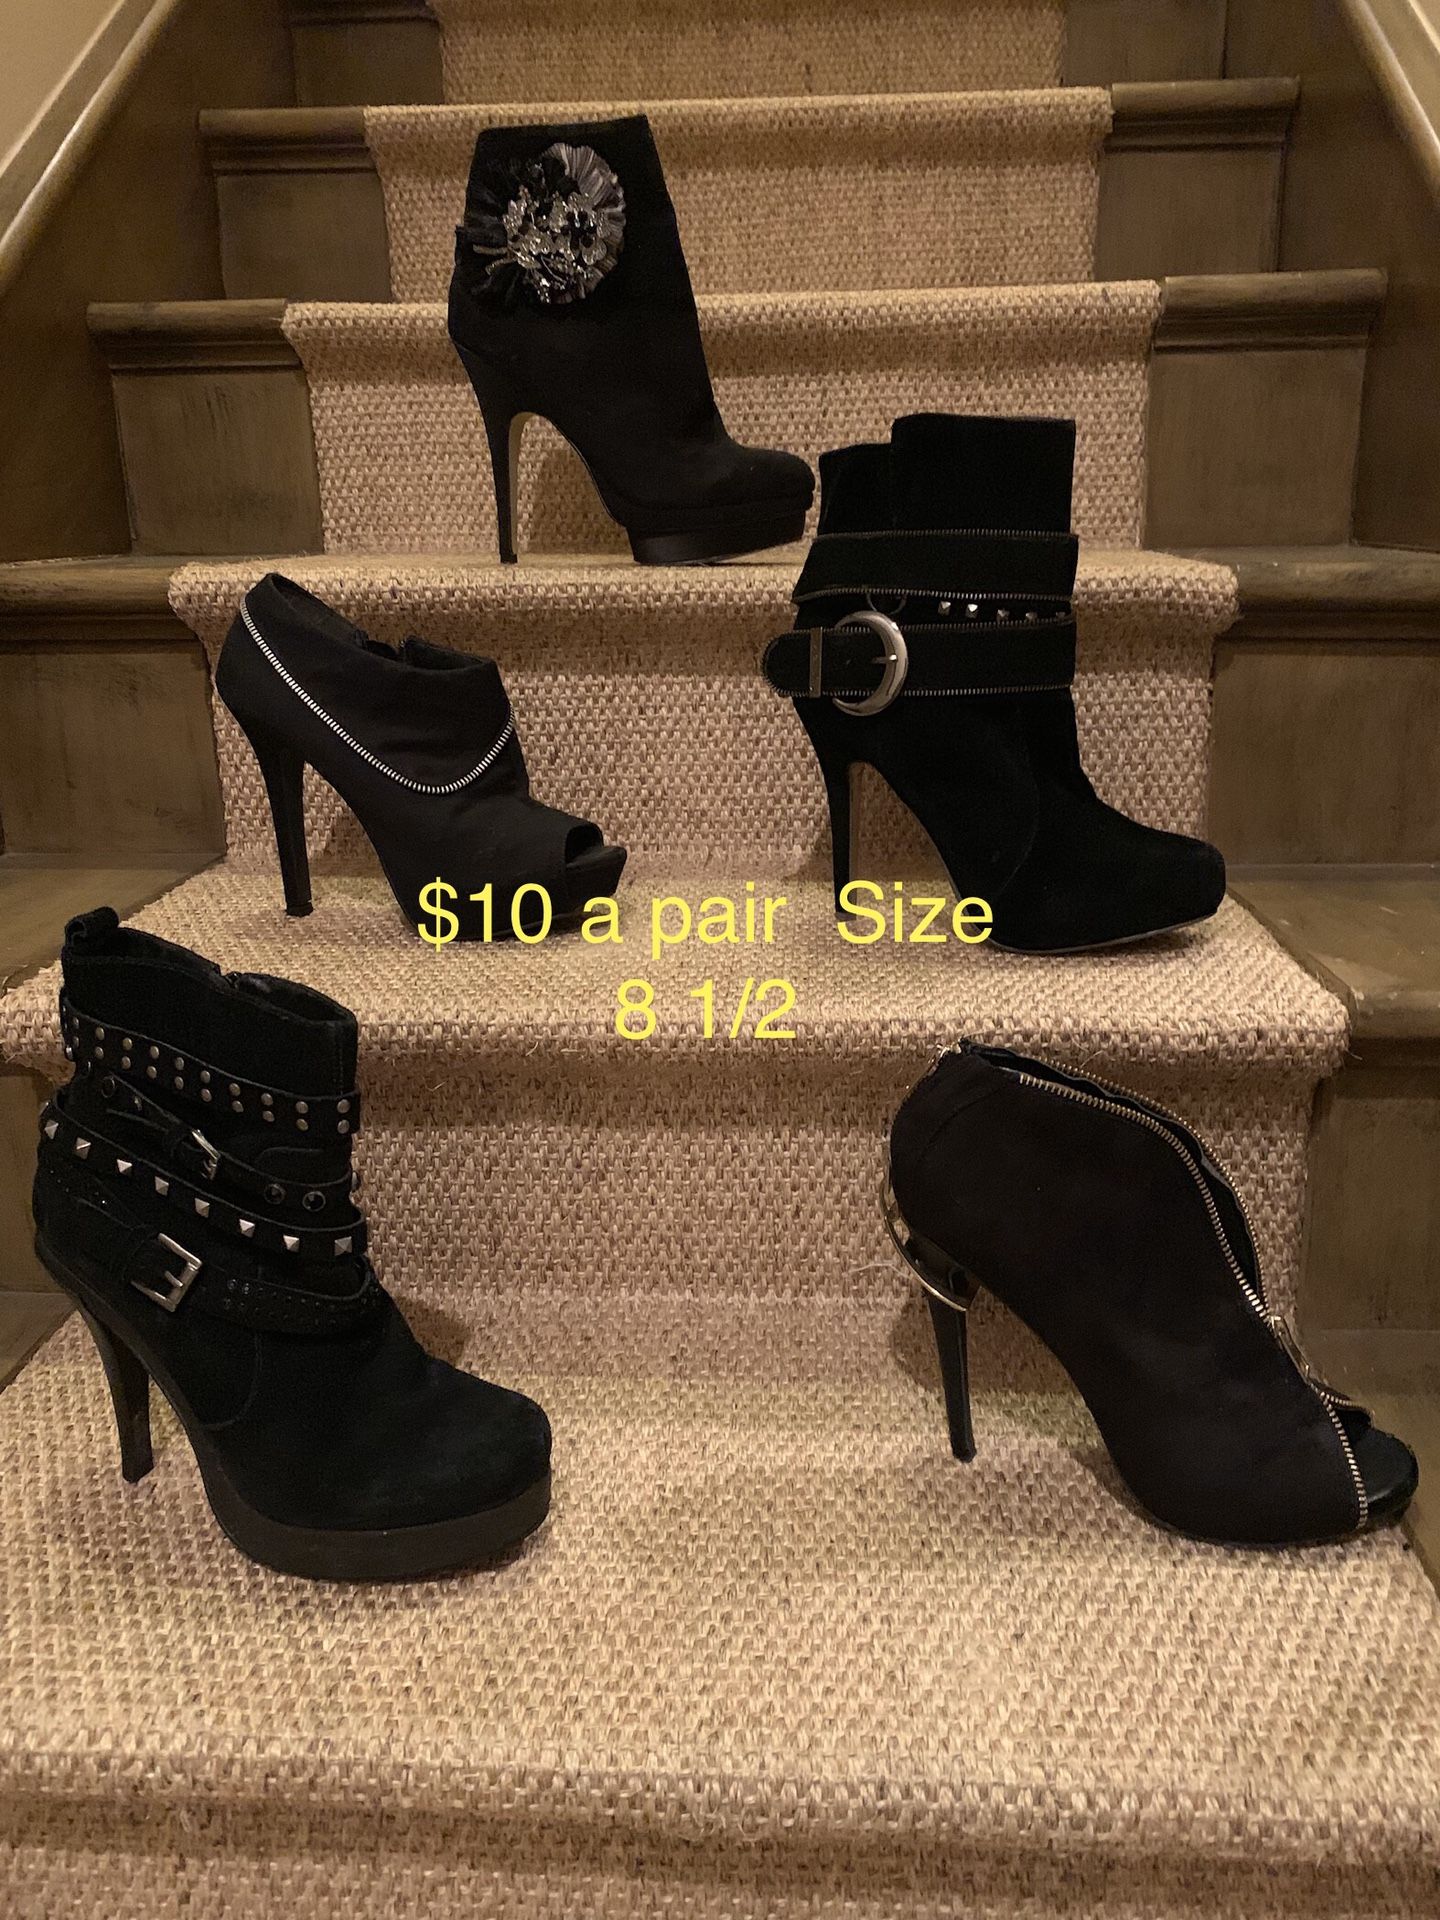 Fashion Booties and Half Boots size 8 1/2